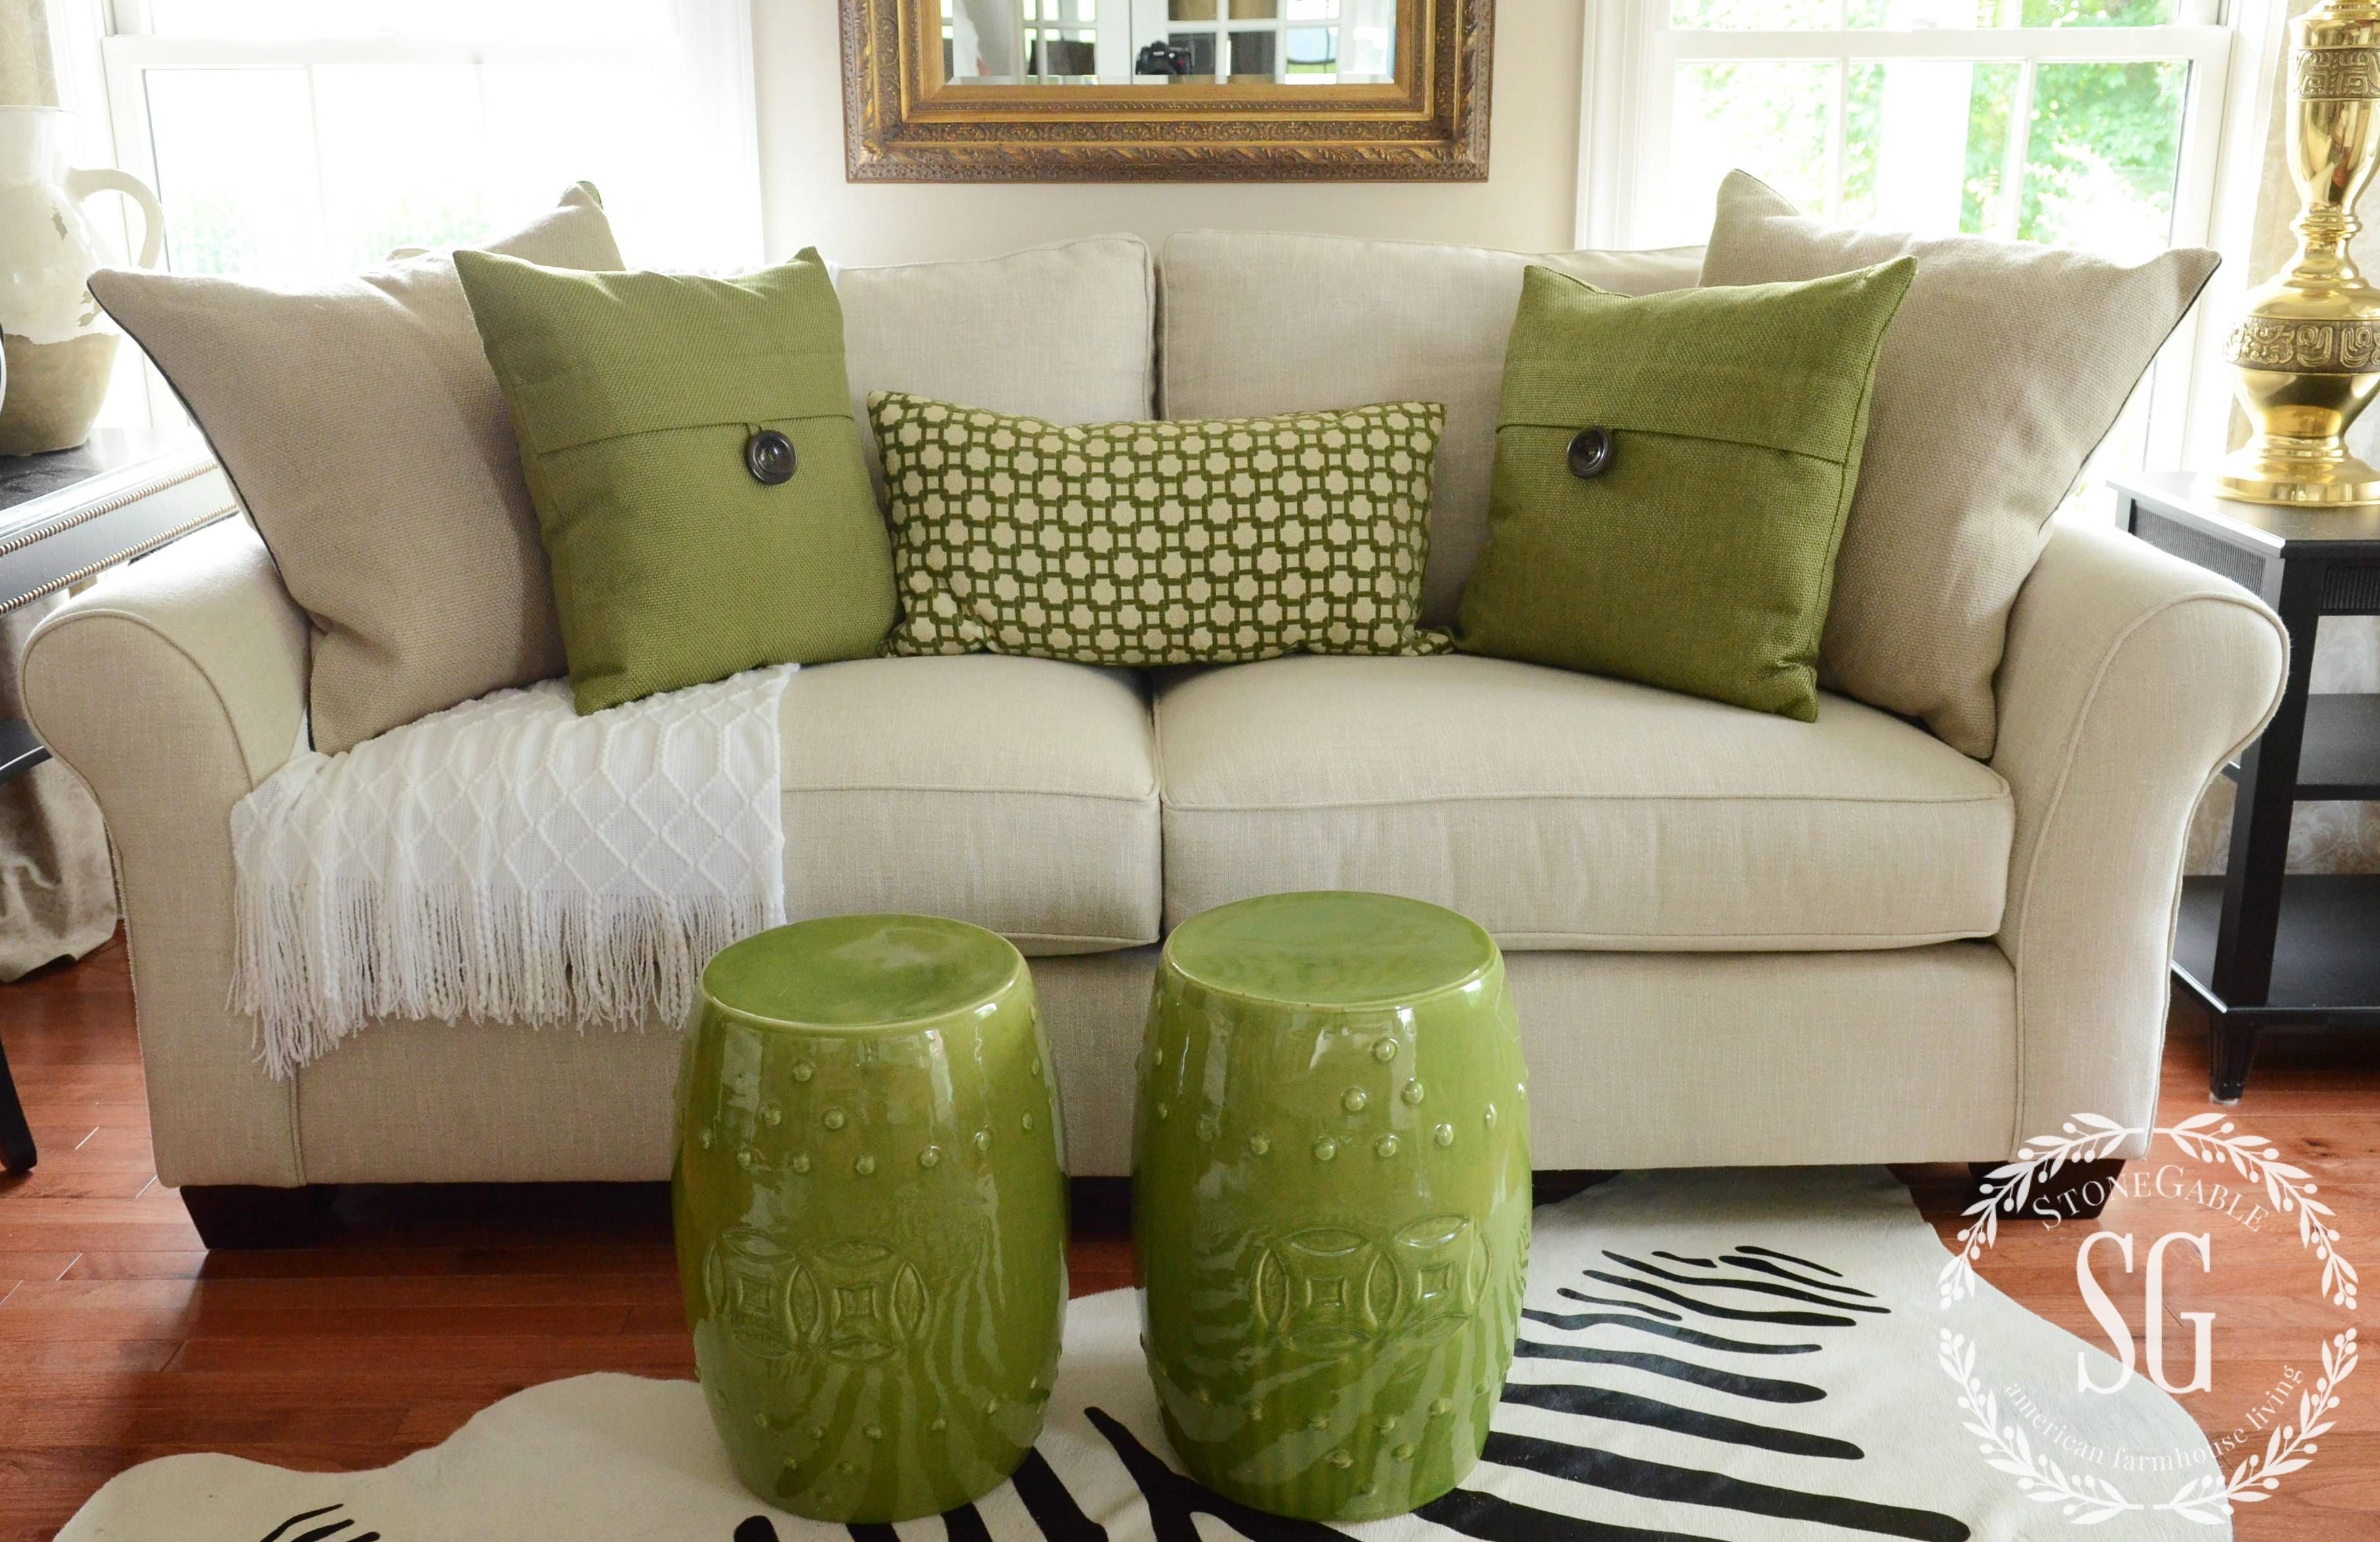 Sofas Center : Decorating With Throw Pillows Cheap Infobury Com With Regard To Cheap Throws For Sofas (View 6 of 30)